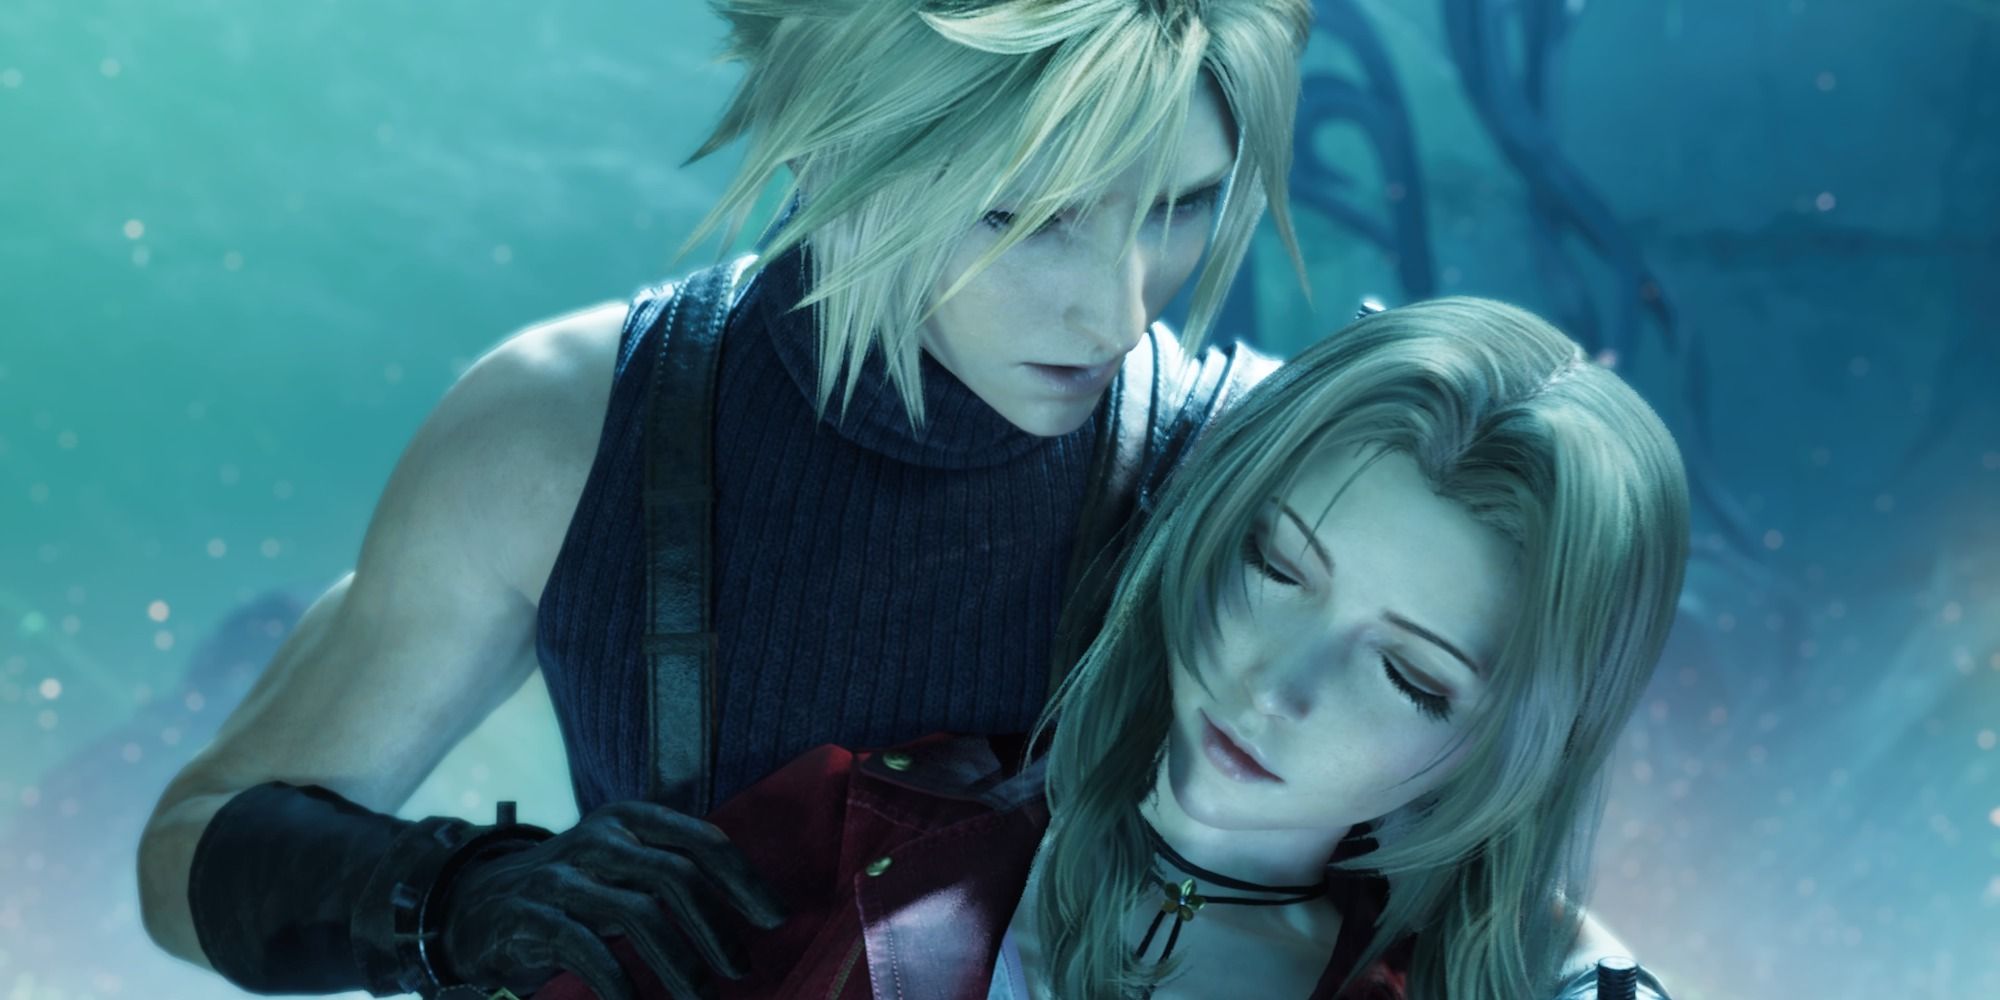 Cloud holding Aerith as she is dying